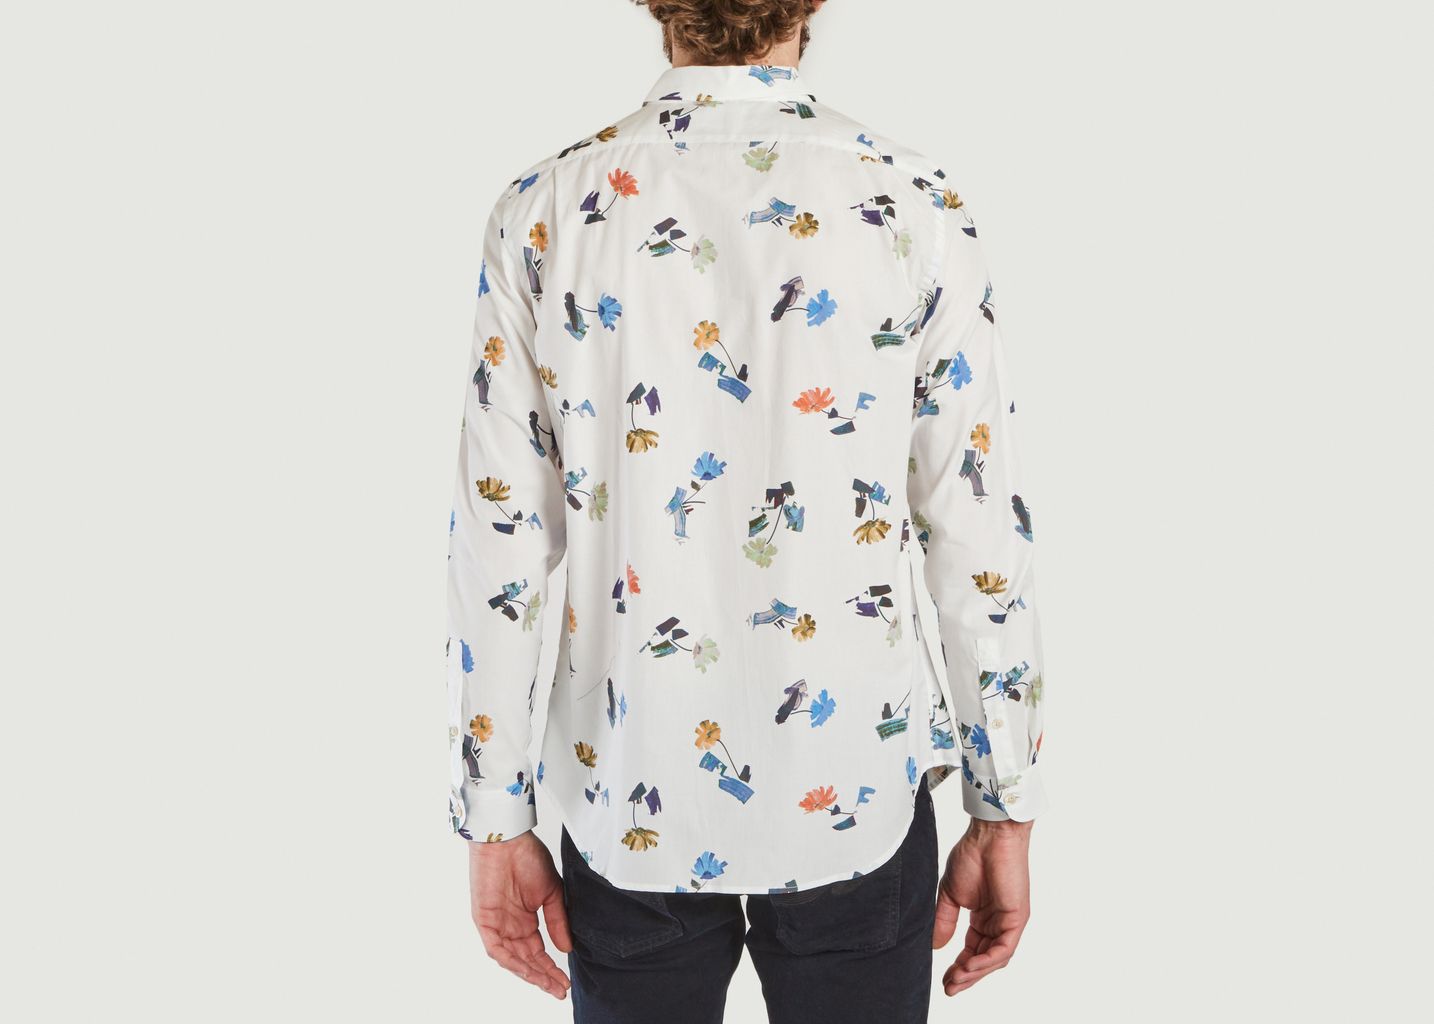 Organic cotton printed shirt - PS by PAUL SMITH